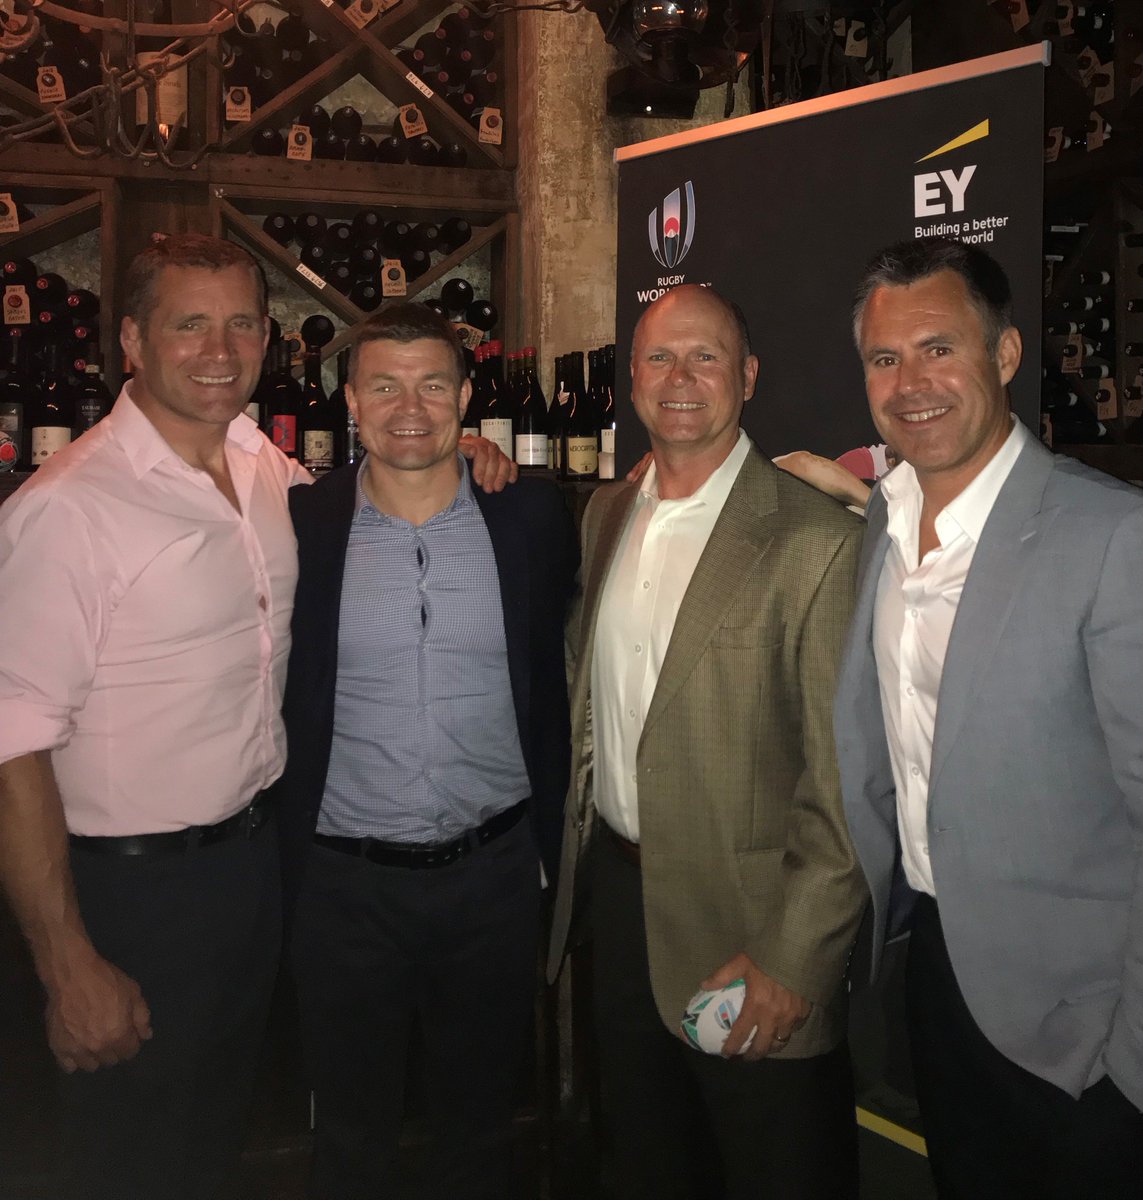 What an awesome experience meeting rugby players from around the world! @Phil_Vickery, @BrianODriscoll, and @KennyLogan were amazing ambassadors and it was great to celebrate @EY_US's sponsorship of the USA Women’s and Men’s Rugby teams with them! @phaidraknight